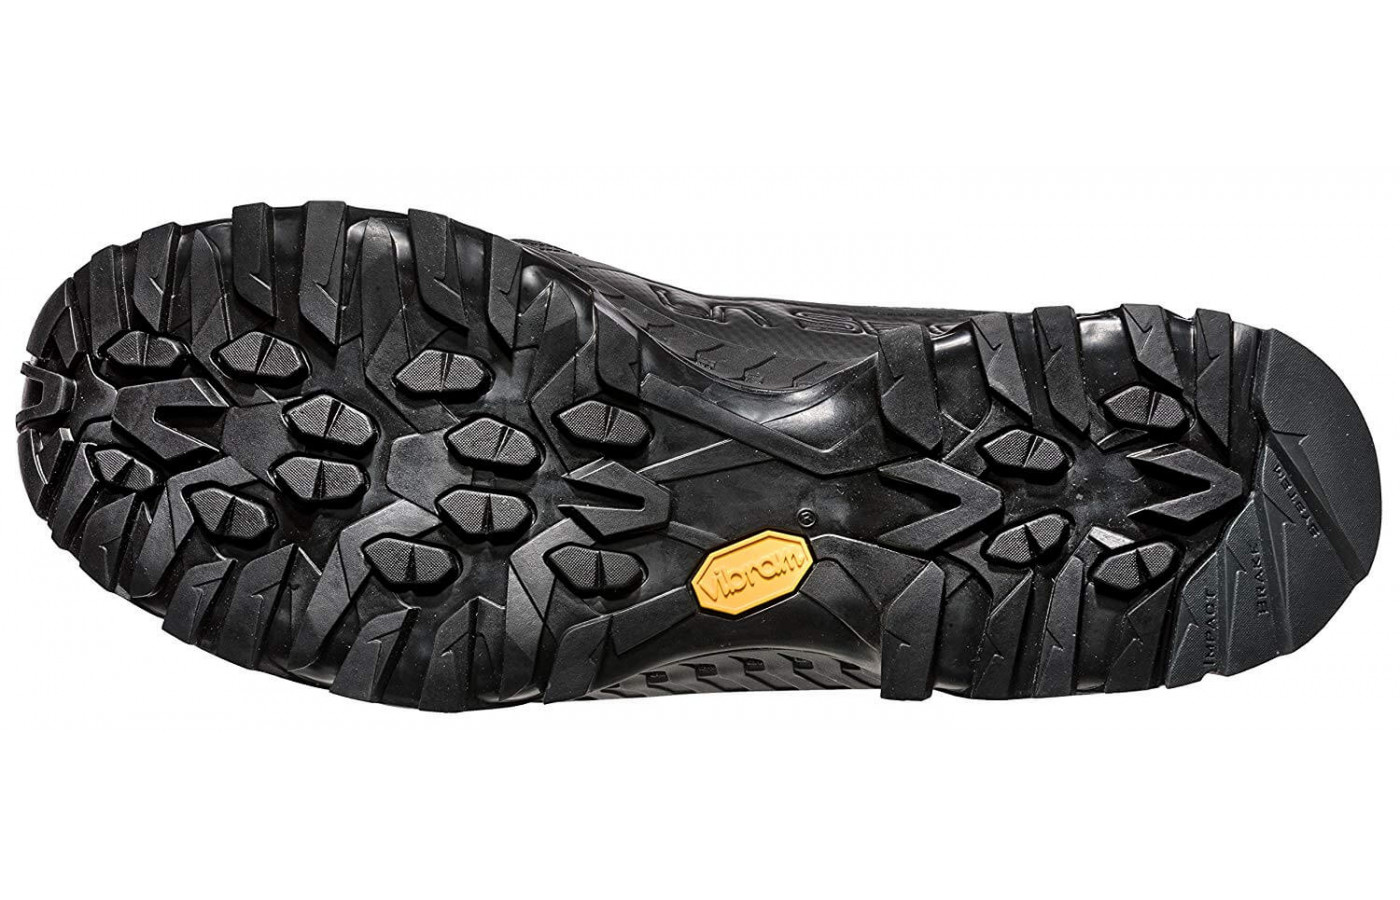 A Vibram XS Trek outsole provides the Spire GTX with incredible traction